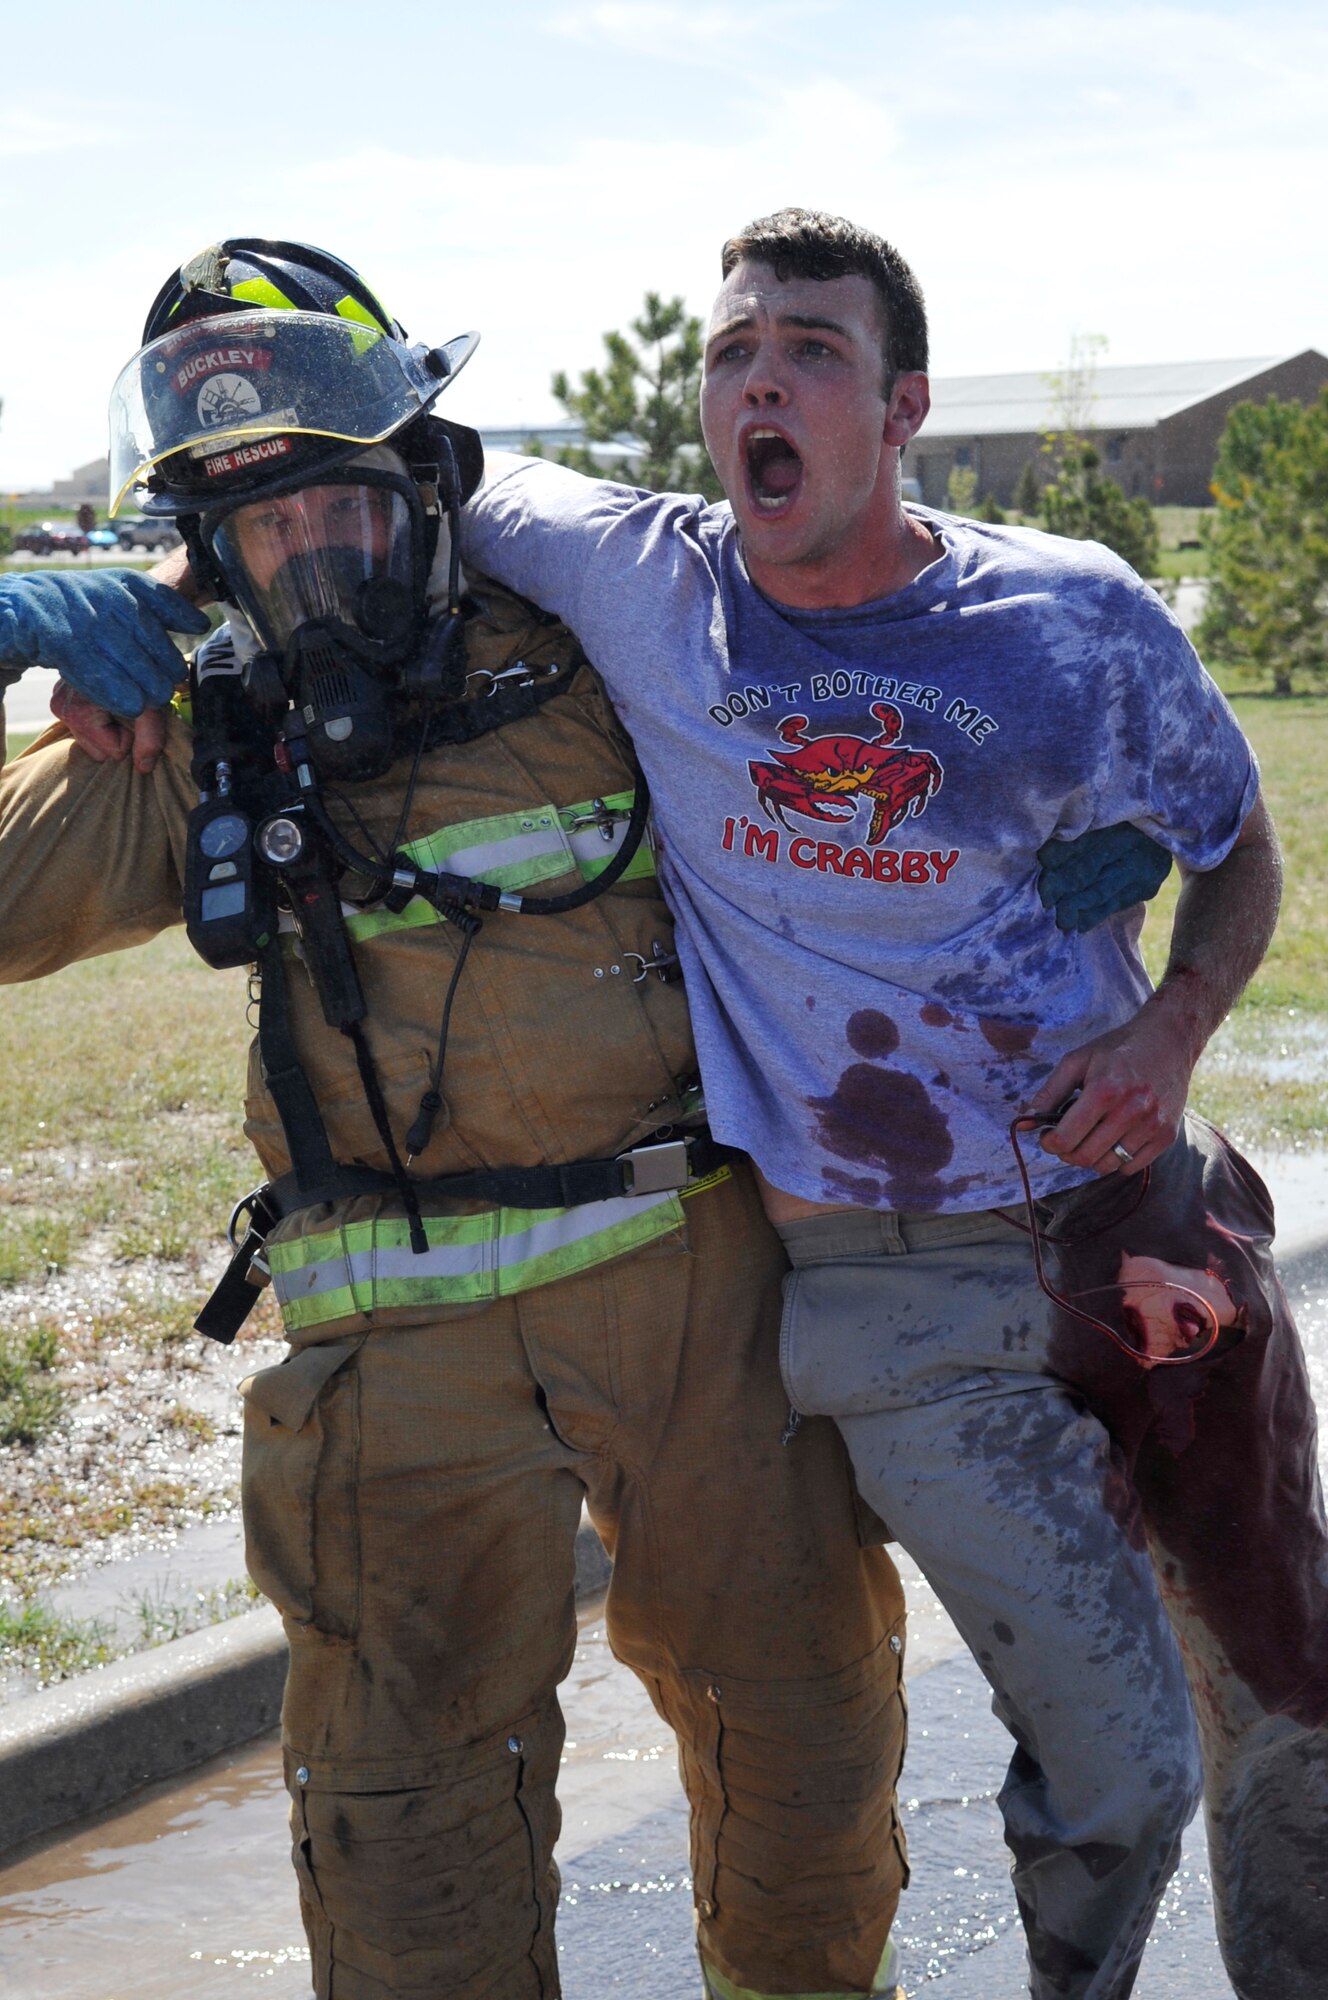 BUCKLEY AIR FORCE BASE, Colo. -- A Buckley firefighter carries Senior Airman Kris Martin, 460th Civil Engineer Squadron, during the All-Hazards Response Training exercise May 21. Airman Martin played the role of a casualty during the exercise.(U.S. Air Force photo by Airman 1st Class Paul Labbe)